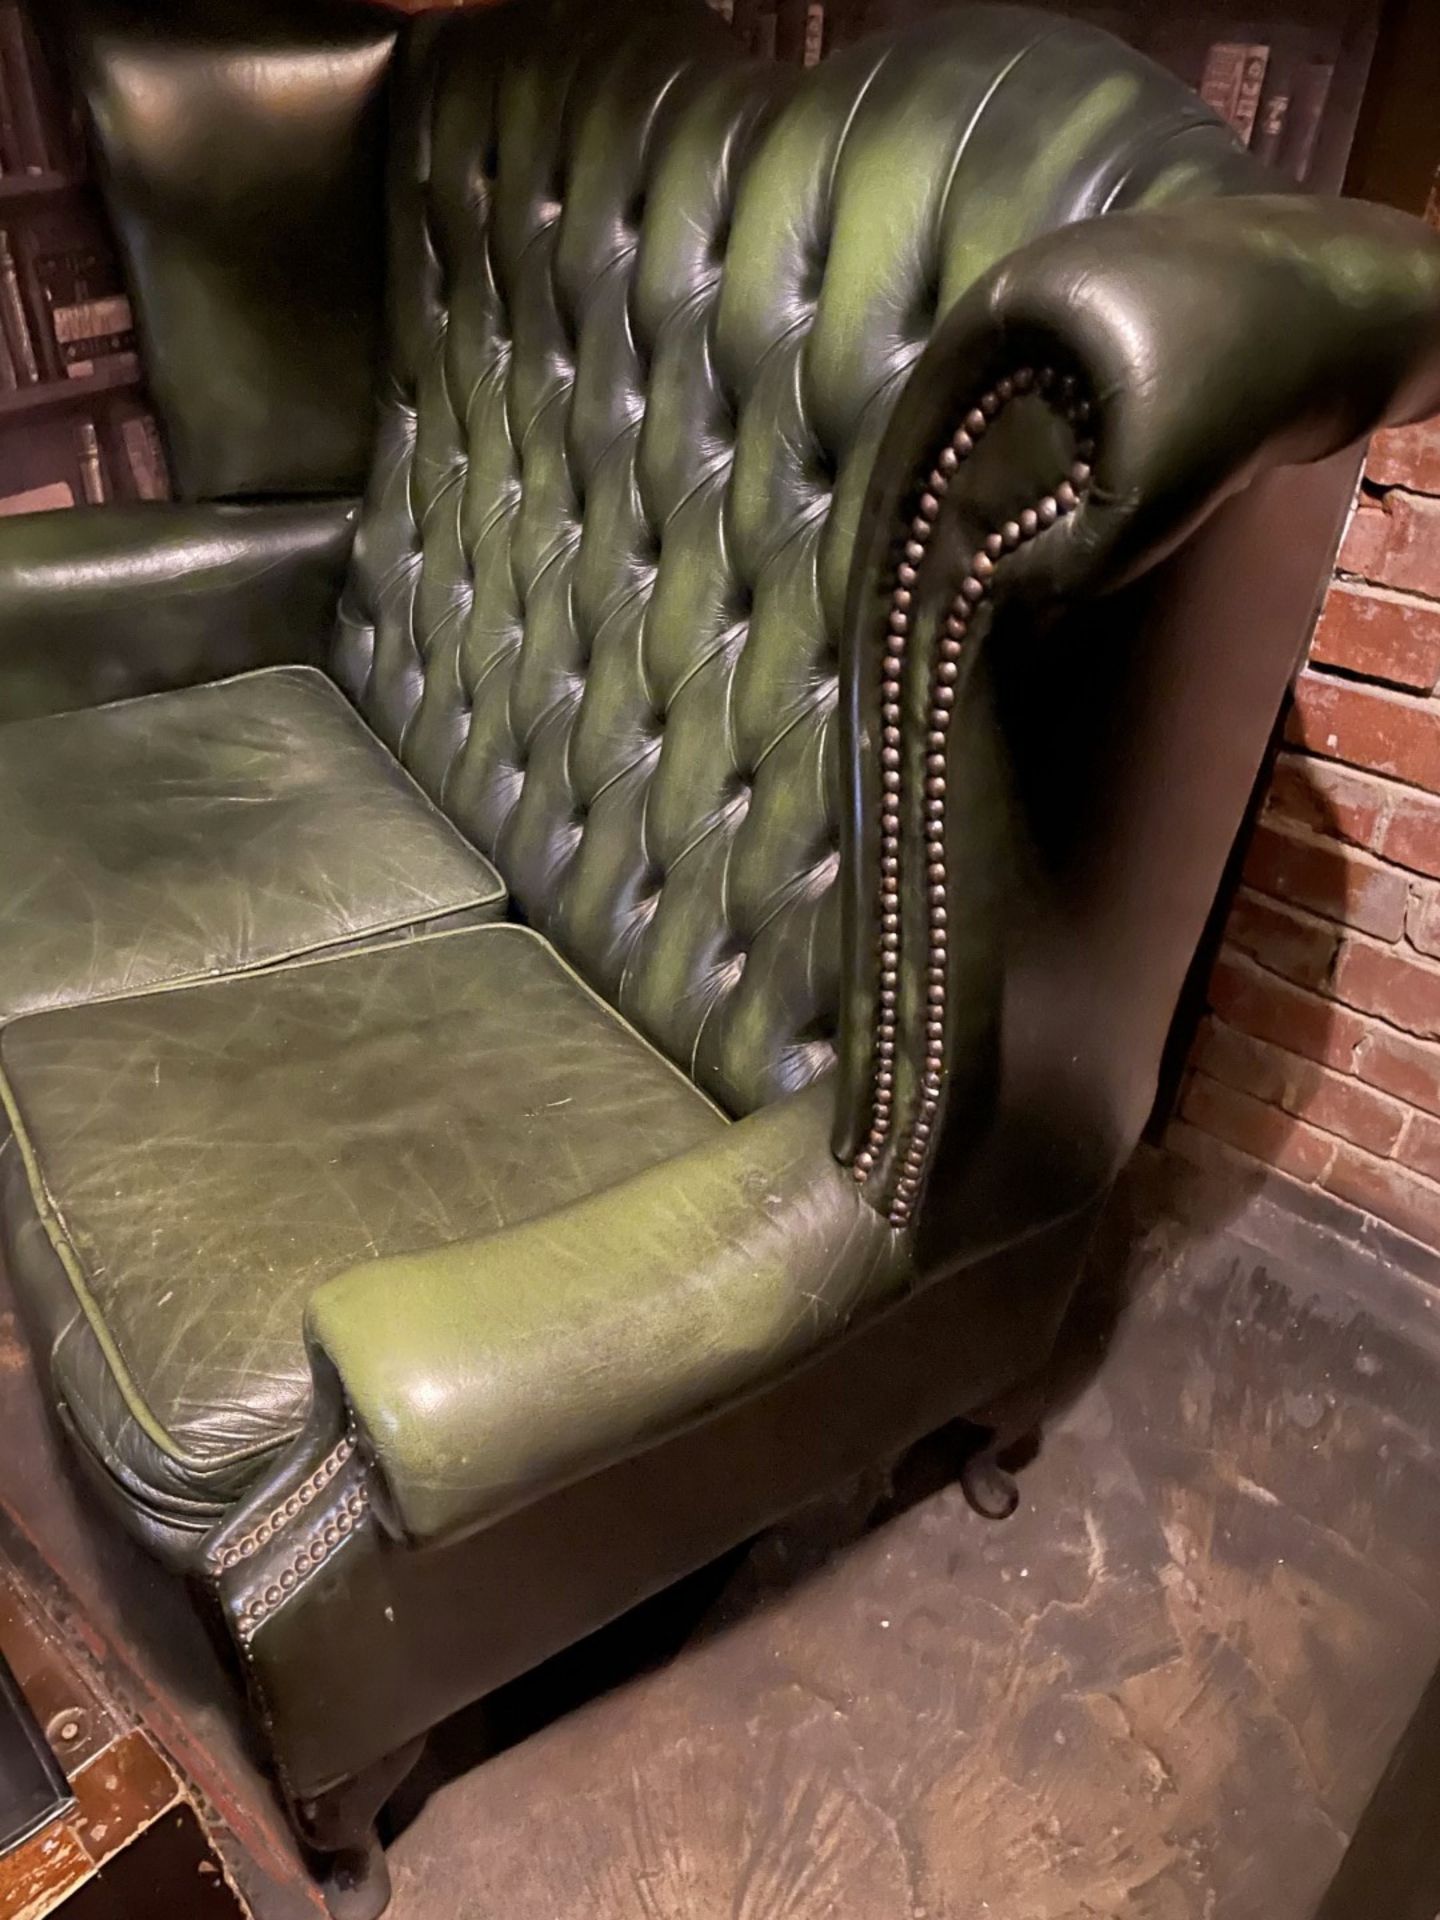 1 x Vintage Victorian-style Green Leather Wing Back Chesterfield 2-Seater Sofa with Studded Detail - Image 5 of 9